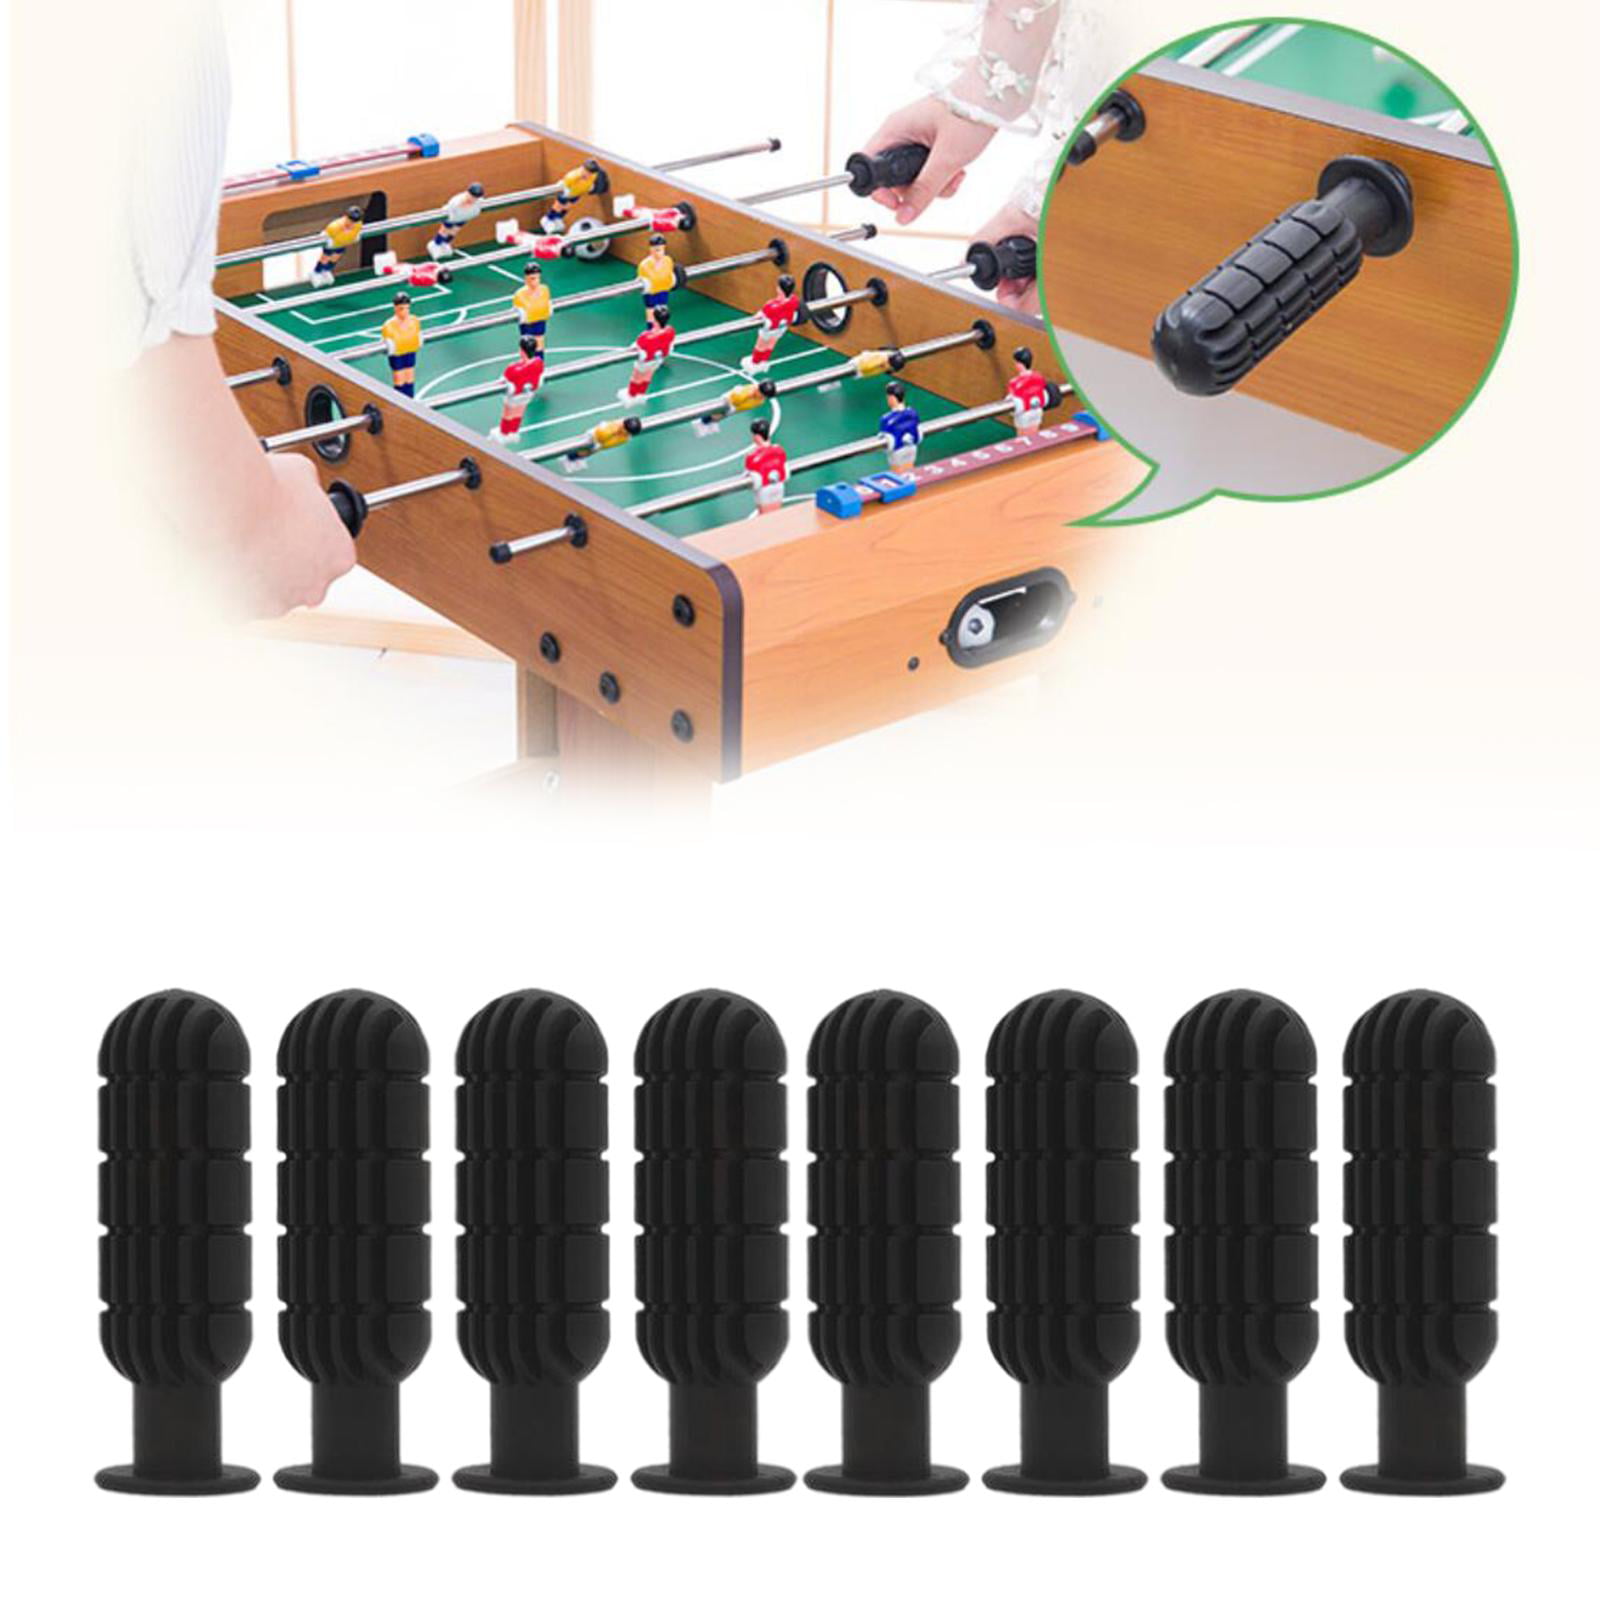 8pcs Table Foosball Grips Set Plastic Table Soccer Spare Parts Kit For Kid Games 